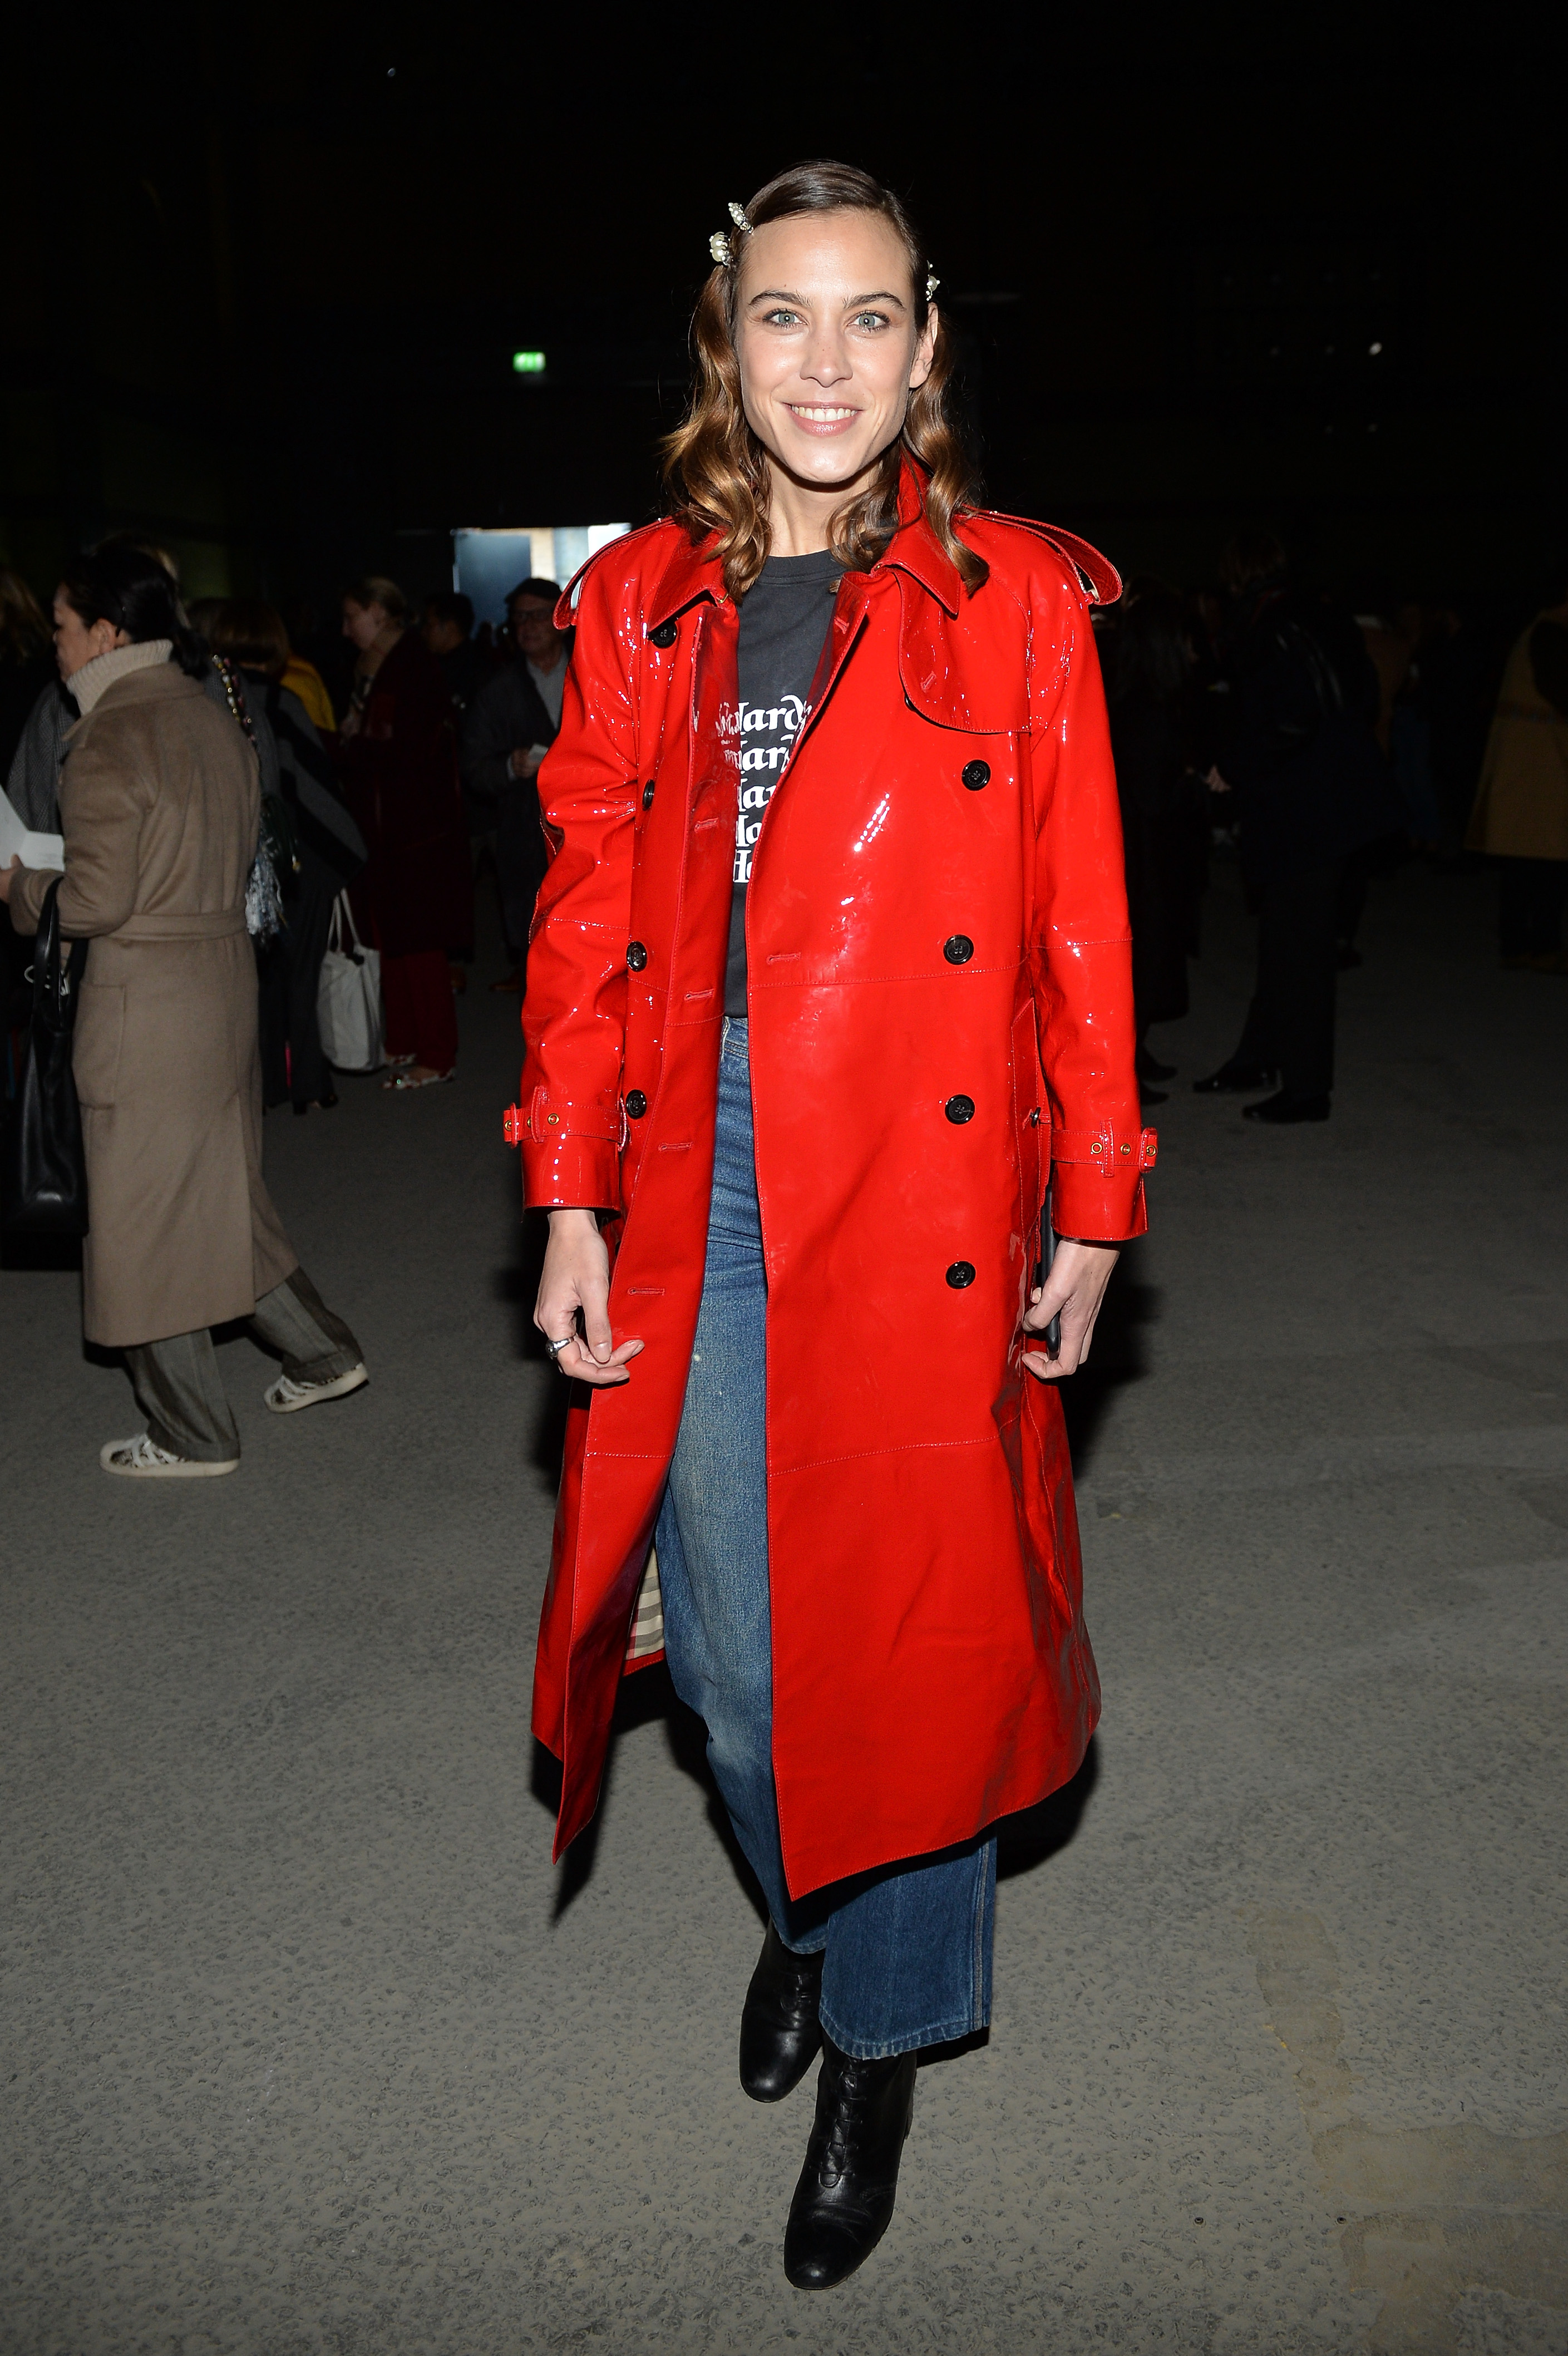 LONDON, ENGLAND - FEBRUARY 17:  Alexa Chung wearing Burberry at the Burberry February 2018 show during London Fashion Week at Dimco Buildings on February 17, 2018 in London, England.  (Photo by David M. Benett/Dave Benett/Getty Images for Burberry) *** Local Caption *** Alexa Chung